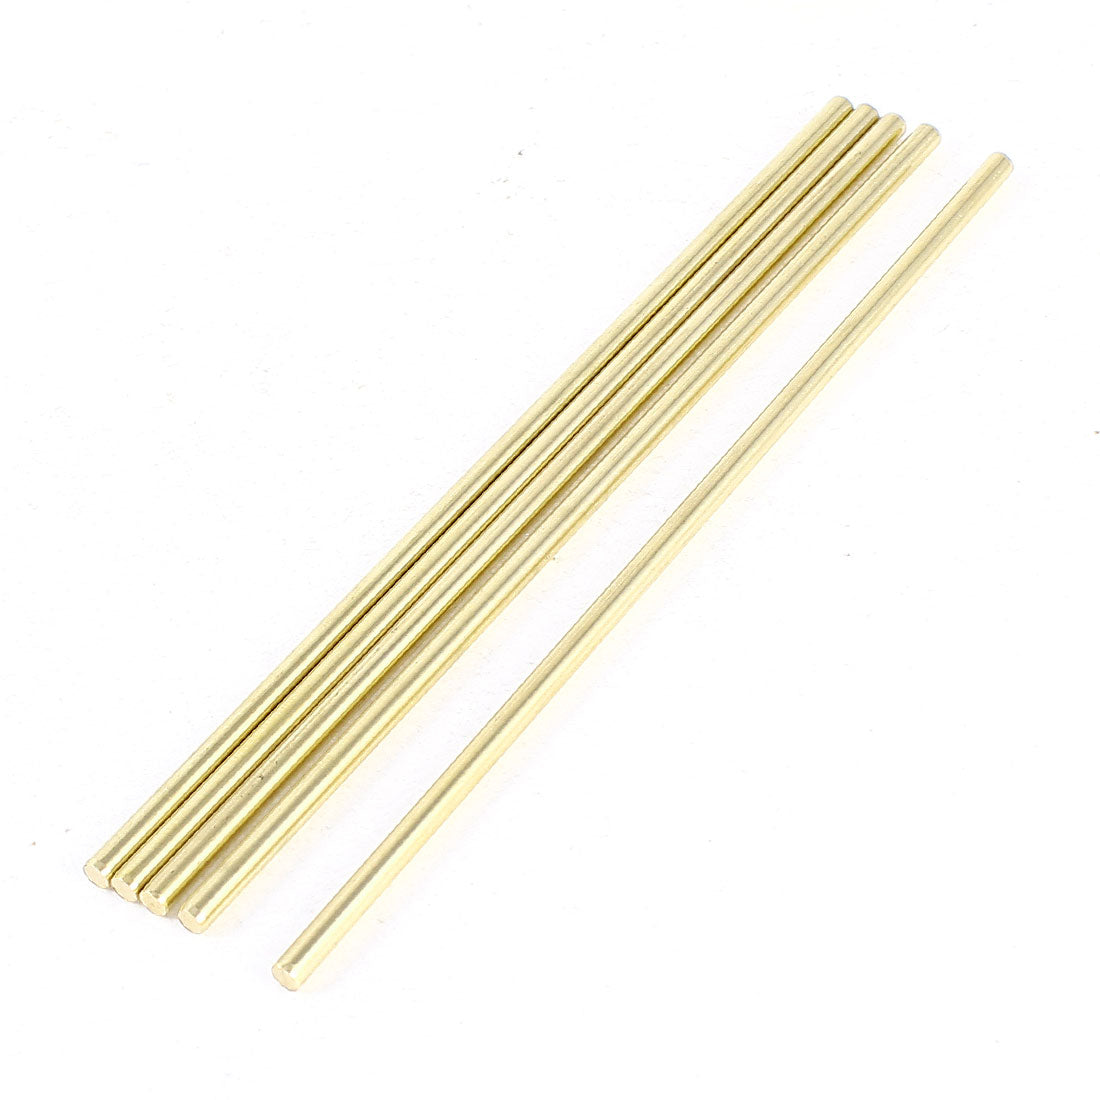 uxcell Uxcell 5 Pcs Car Helicopter Model DIY Brass Axles Rod Bars 3mm x 120mm